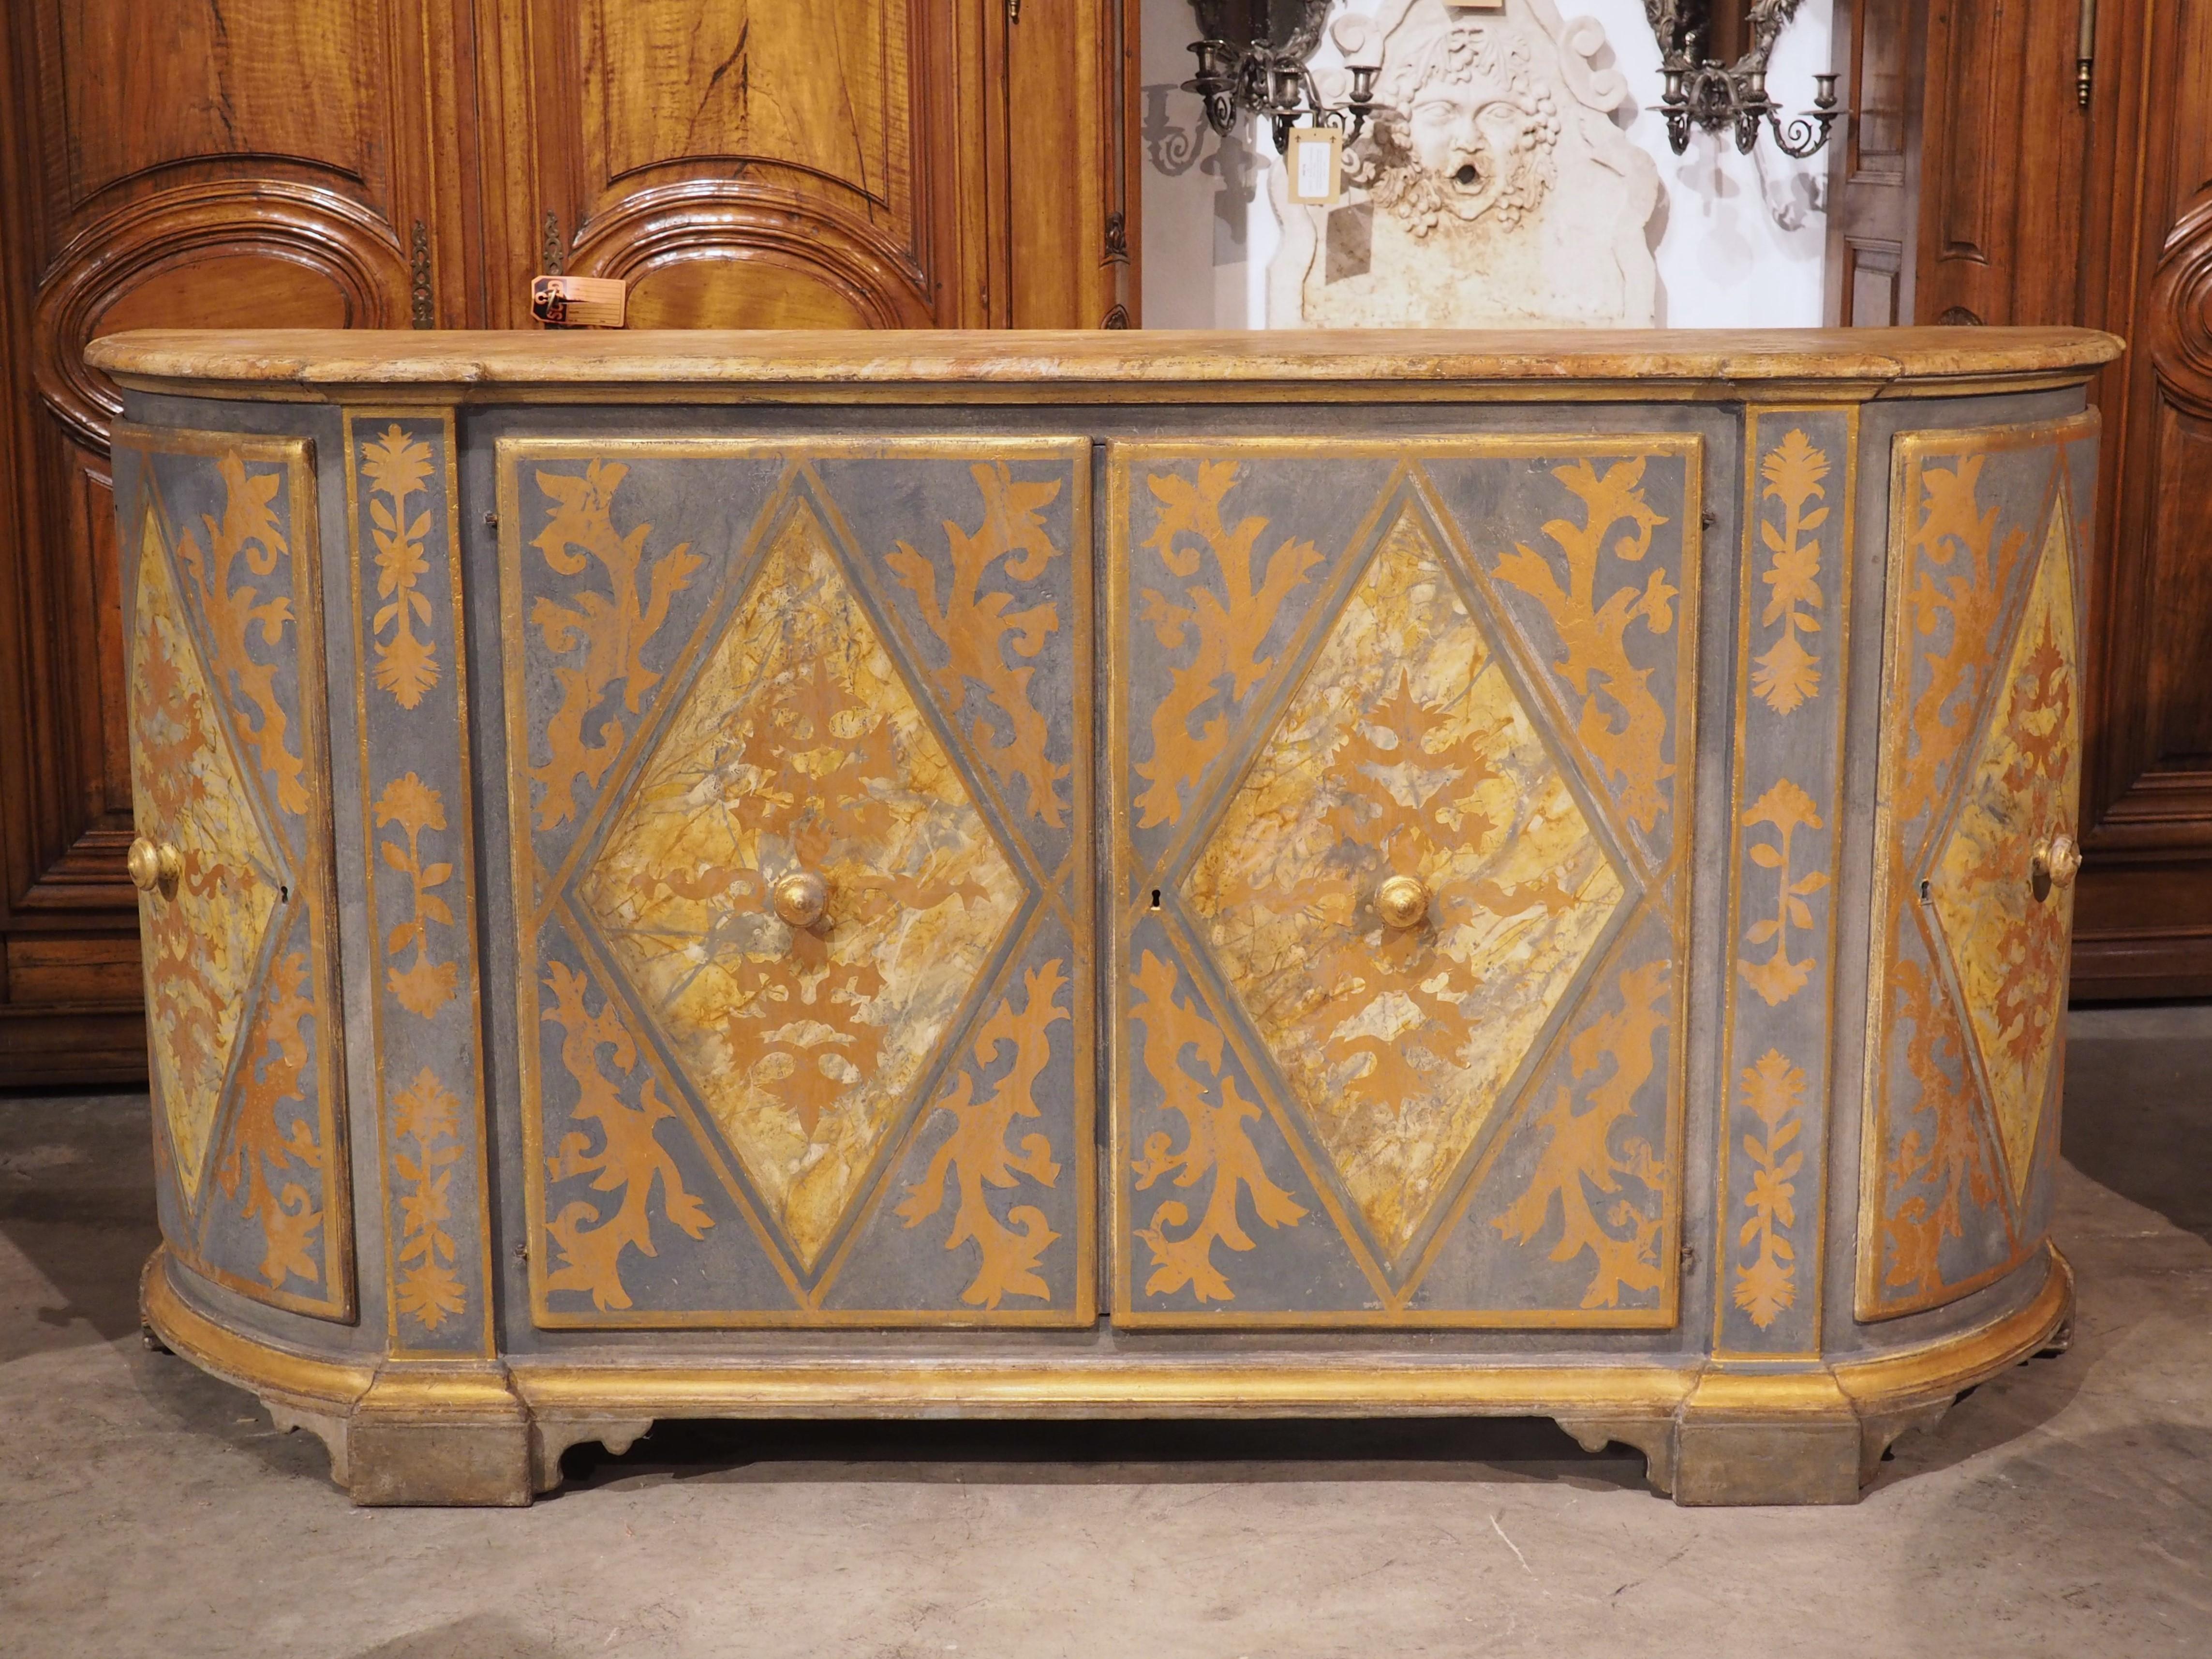 19th Century 4-Door Powder Blue and Gold Painted Credenza from Italy For Sale 13